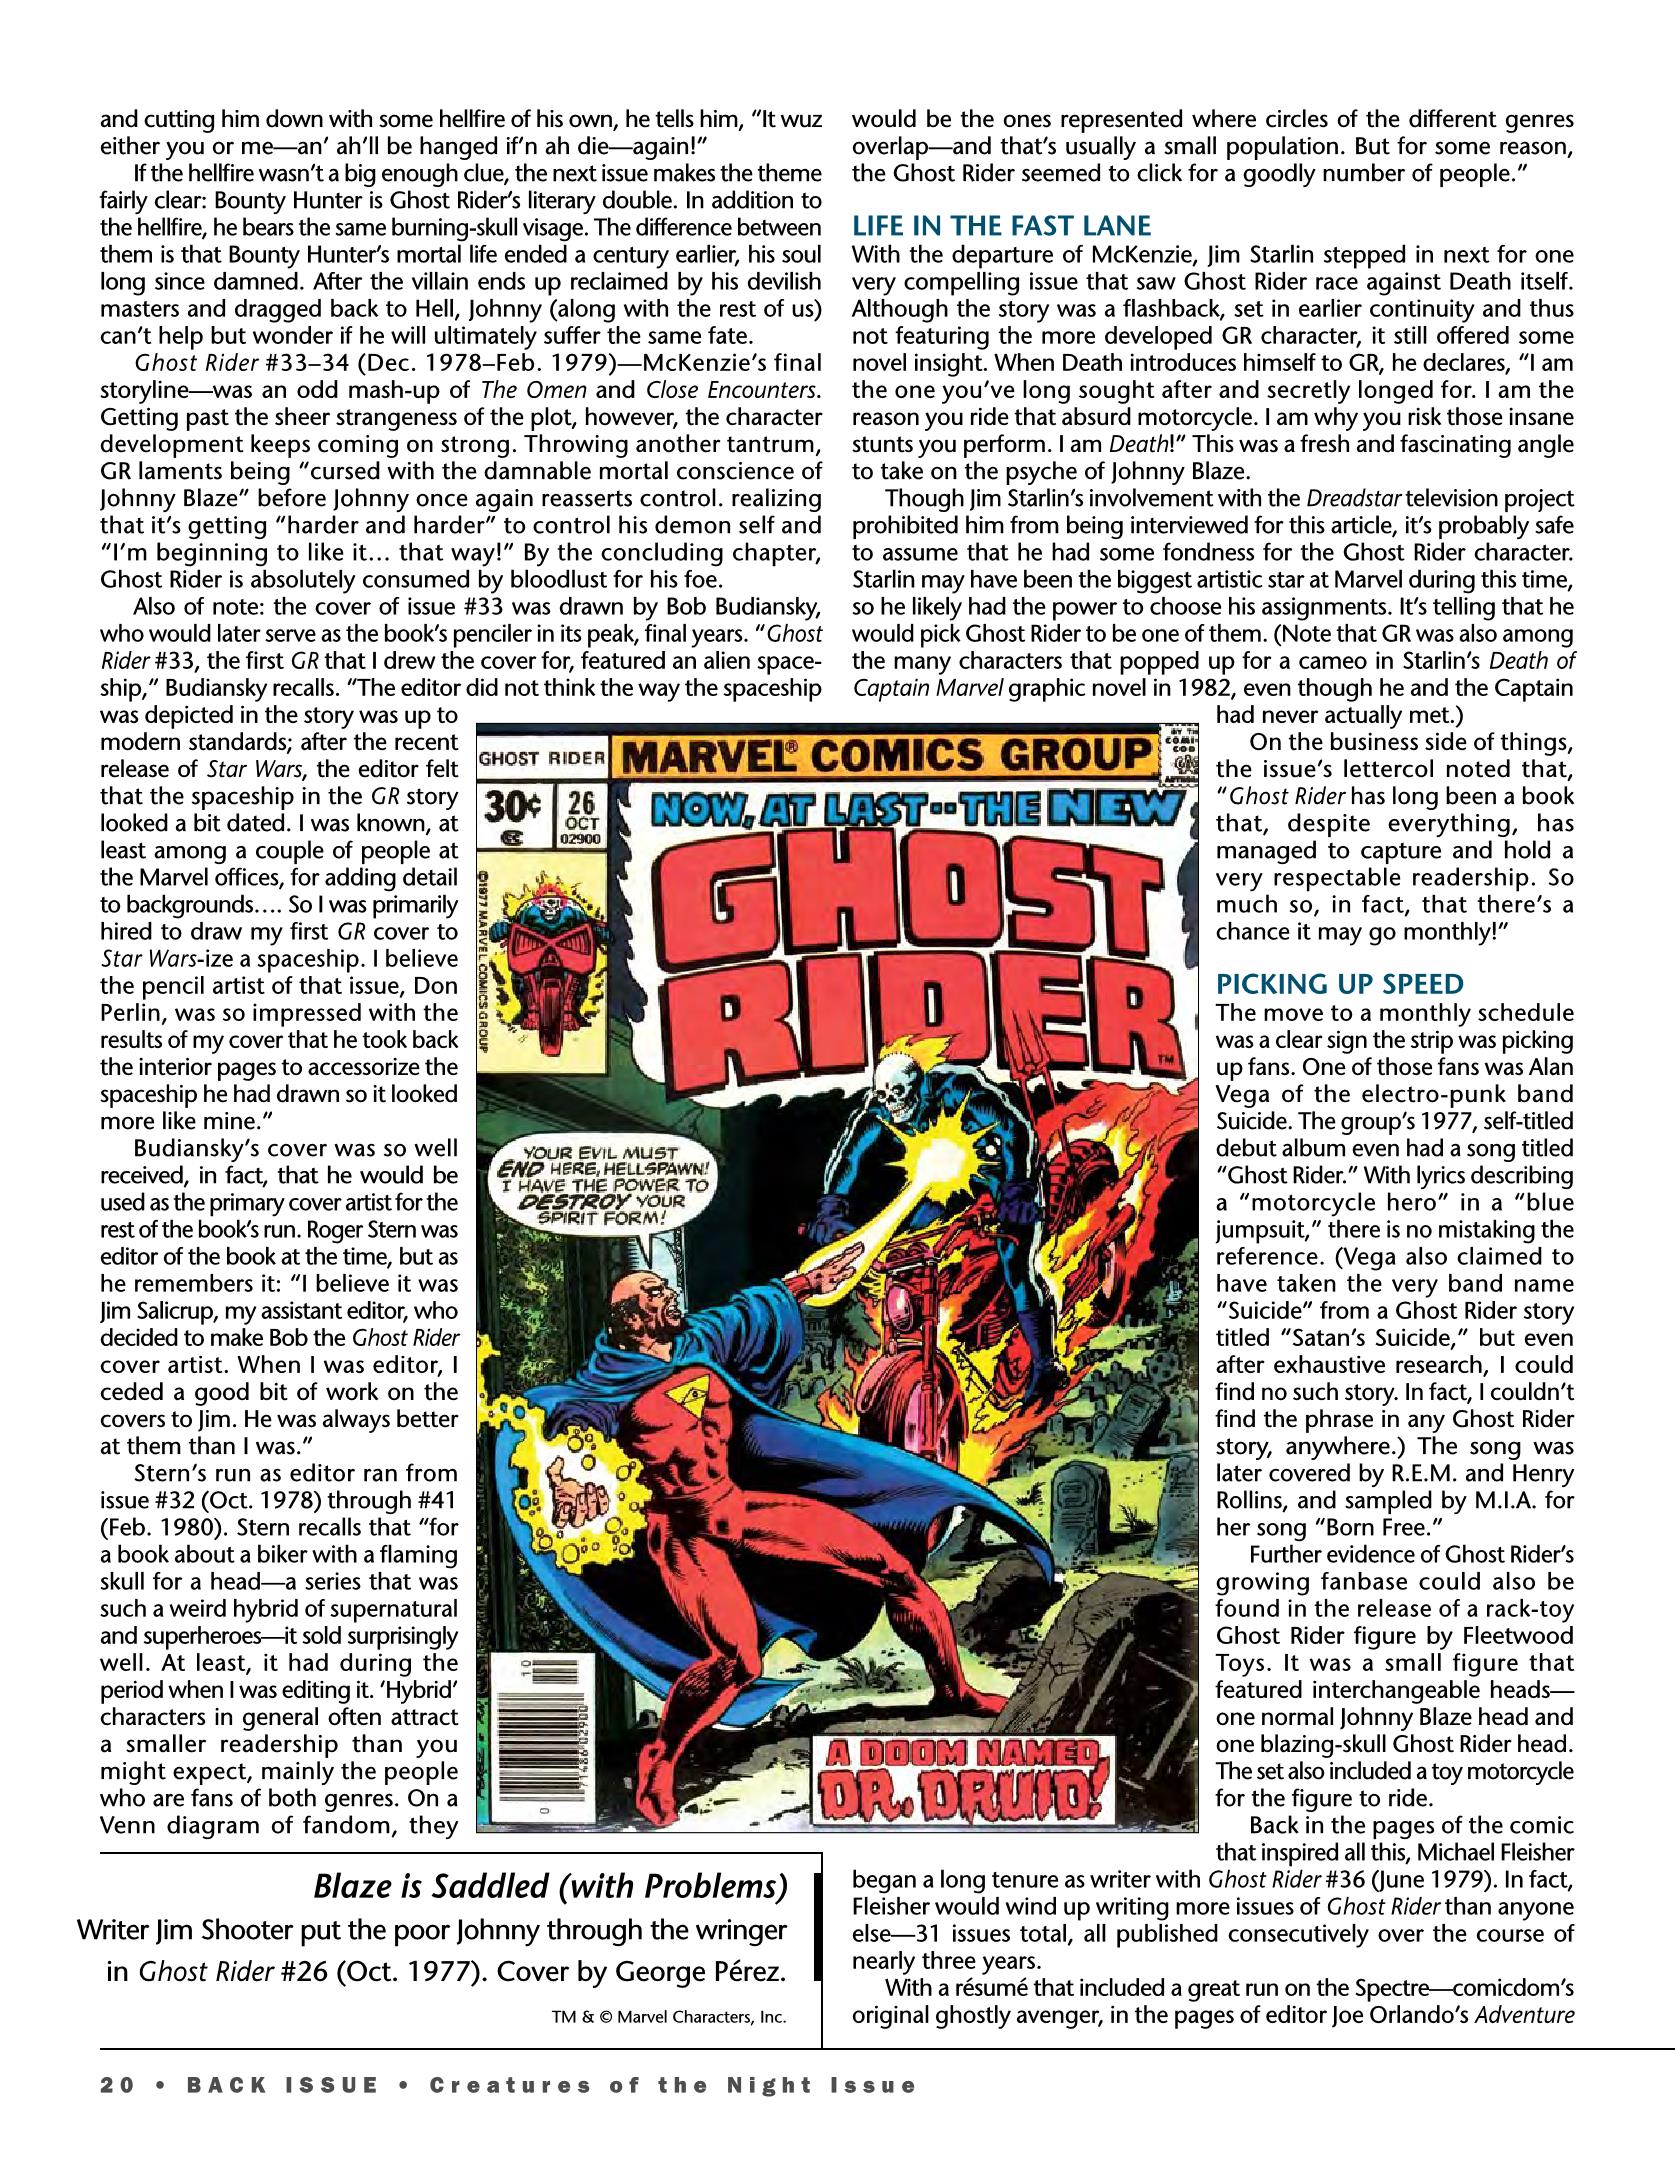 Read online Back Issue comic -  Issue #95 - 15